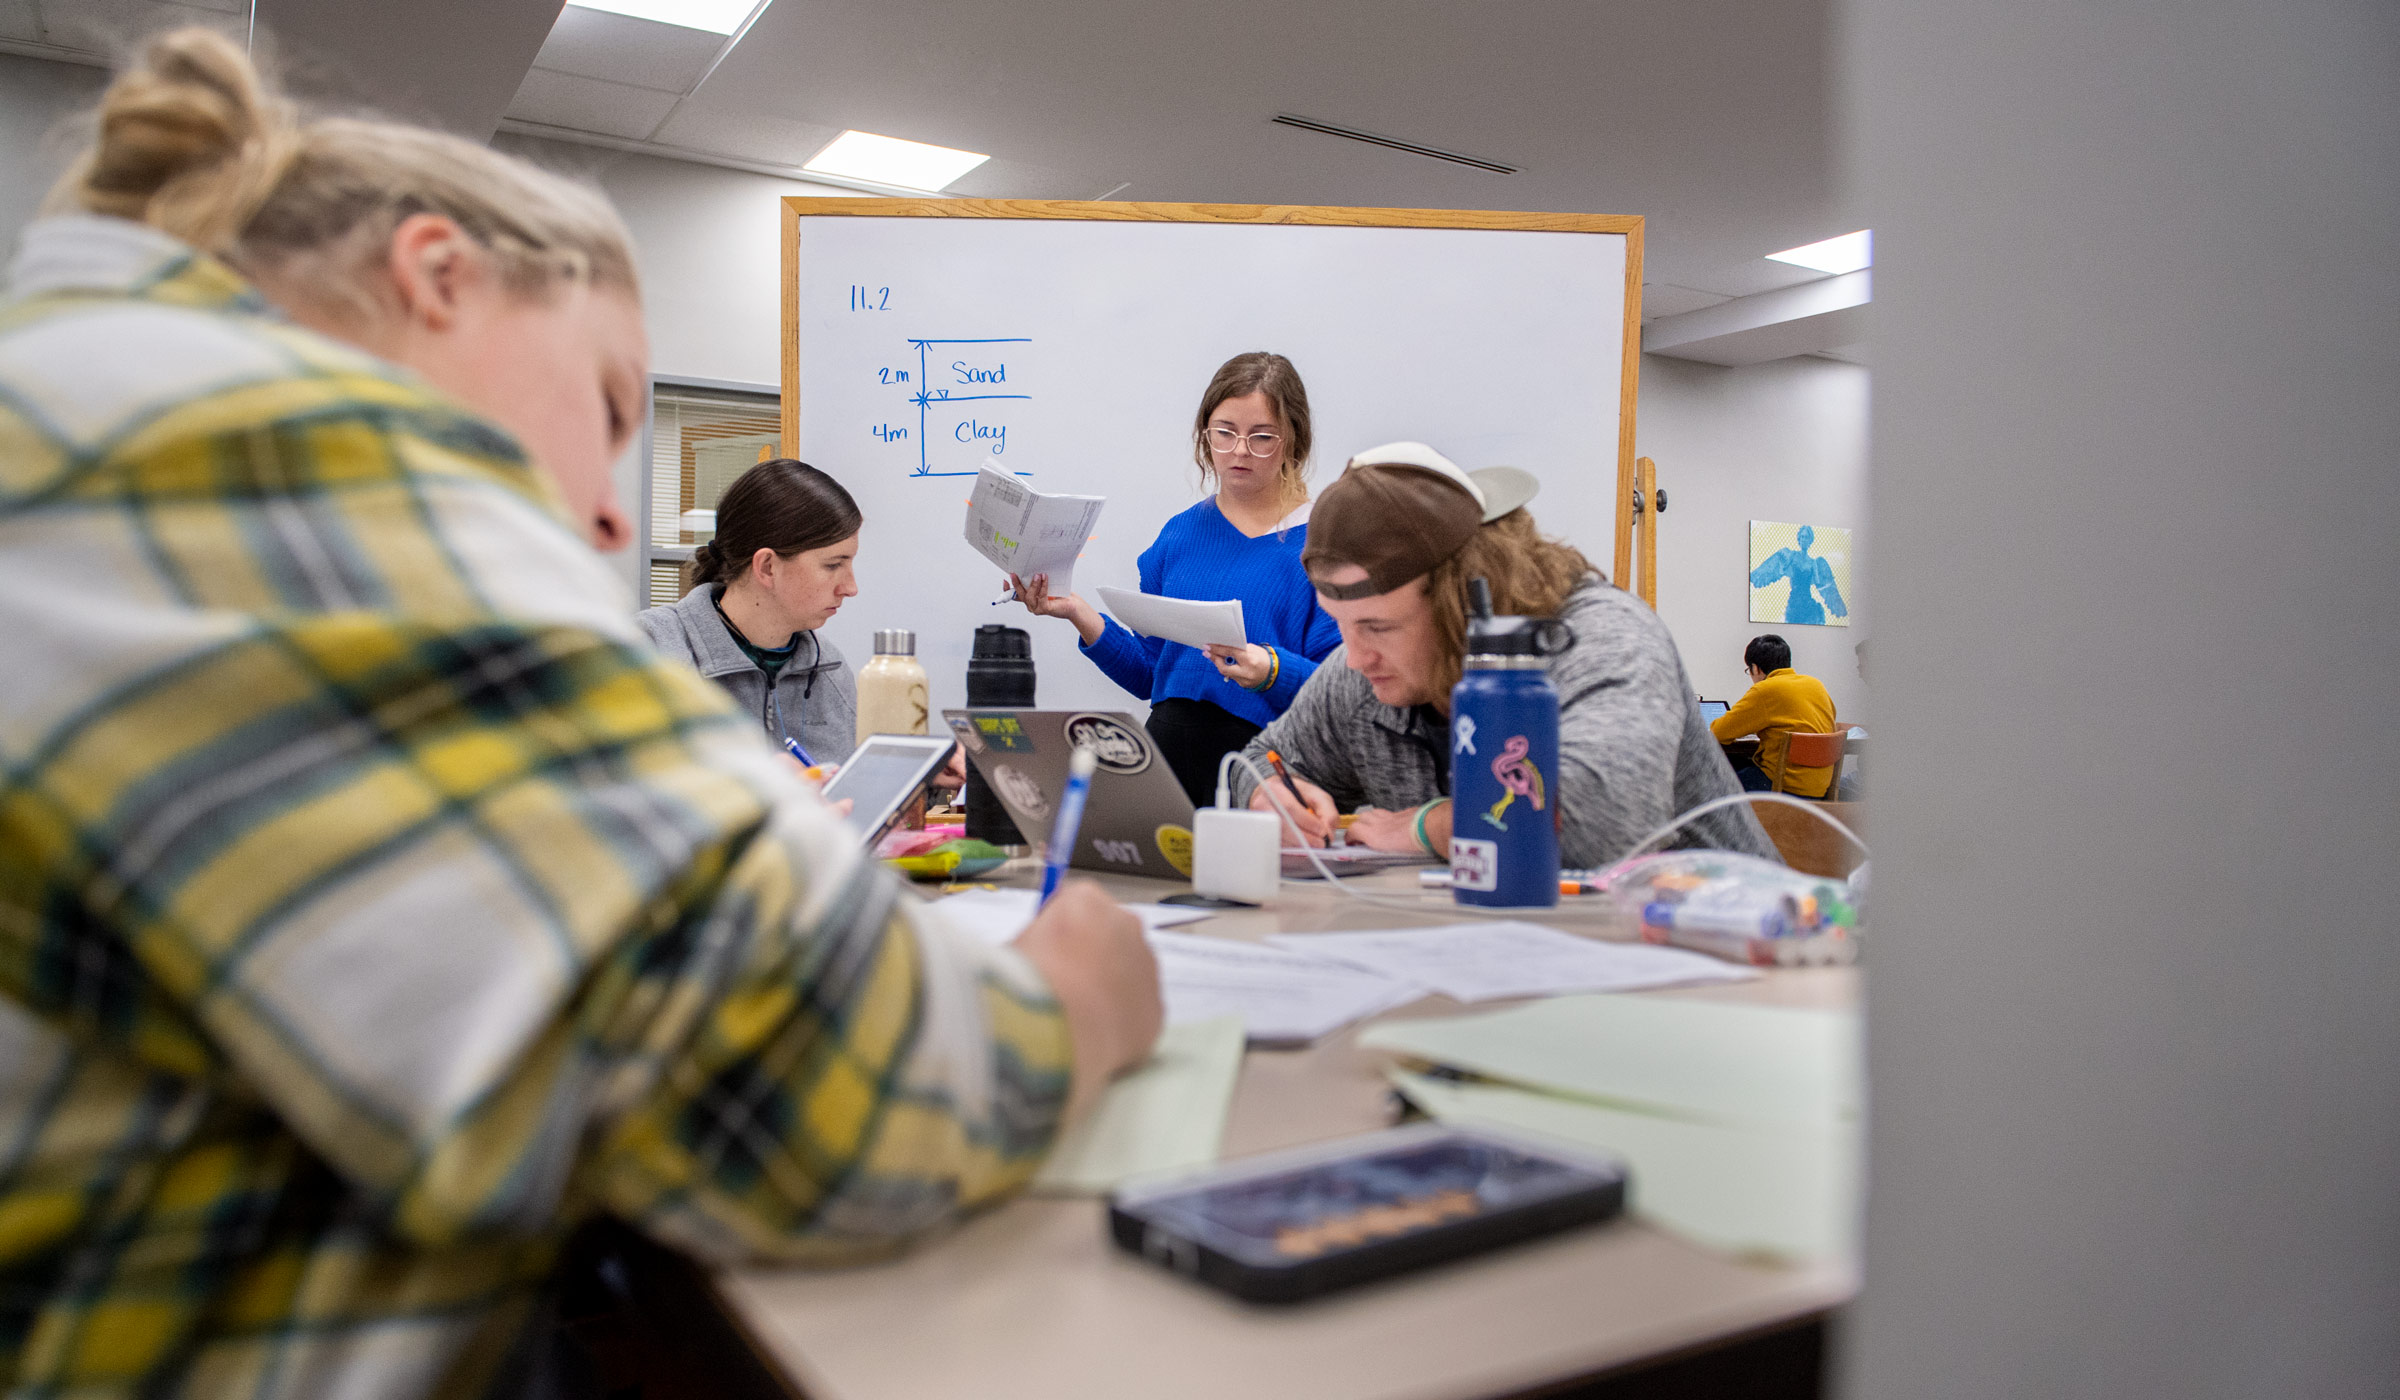 A group of students concentrates on their study materials around a table while one in blue readies to write on a whiteboad beyond.